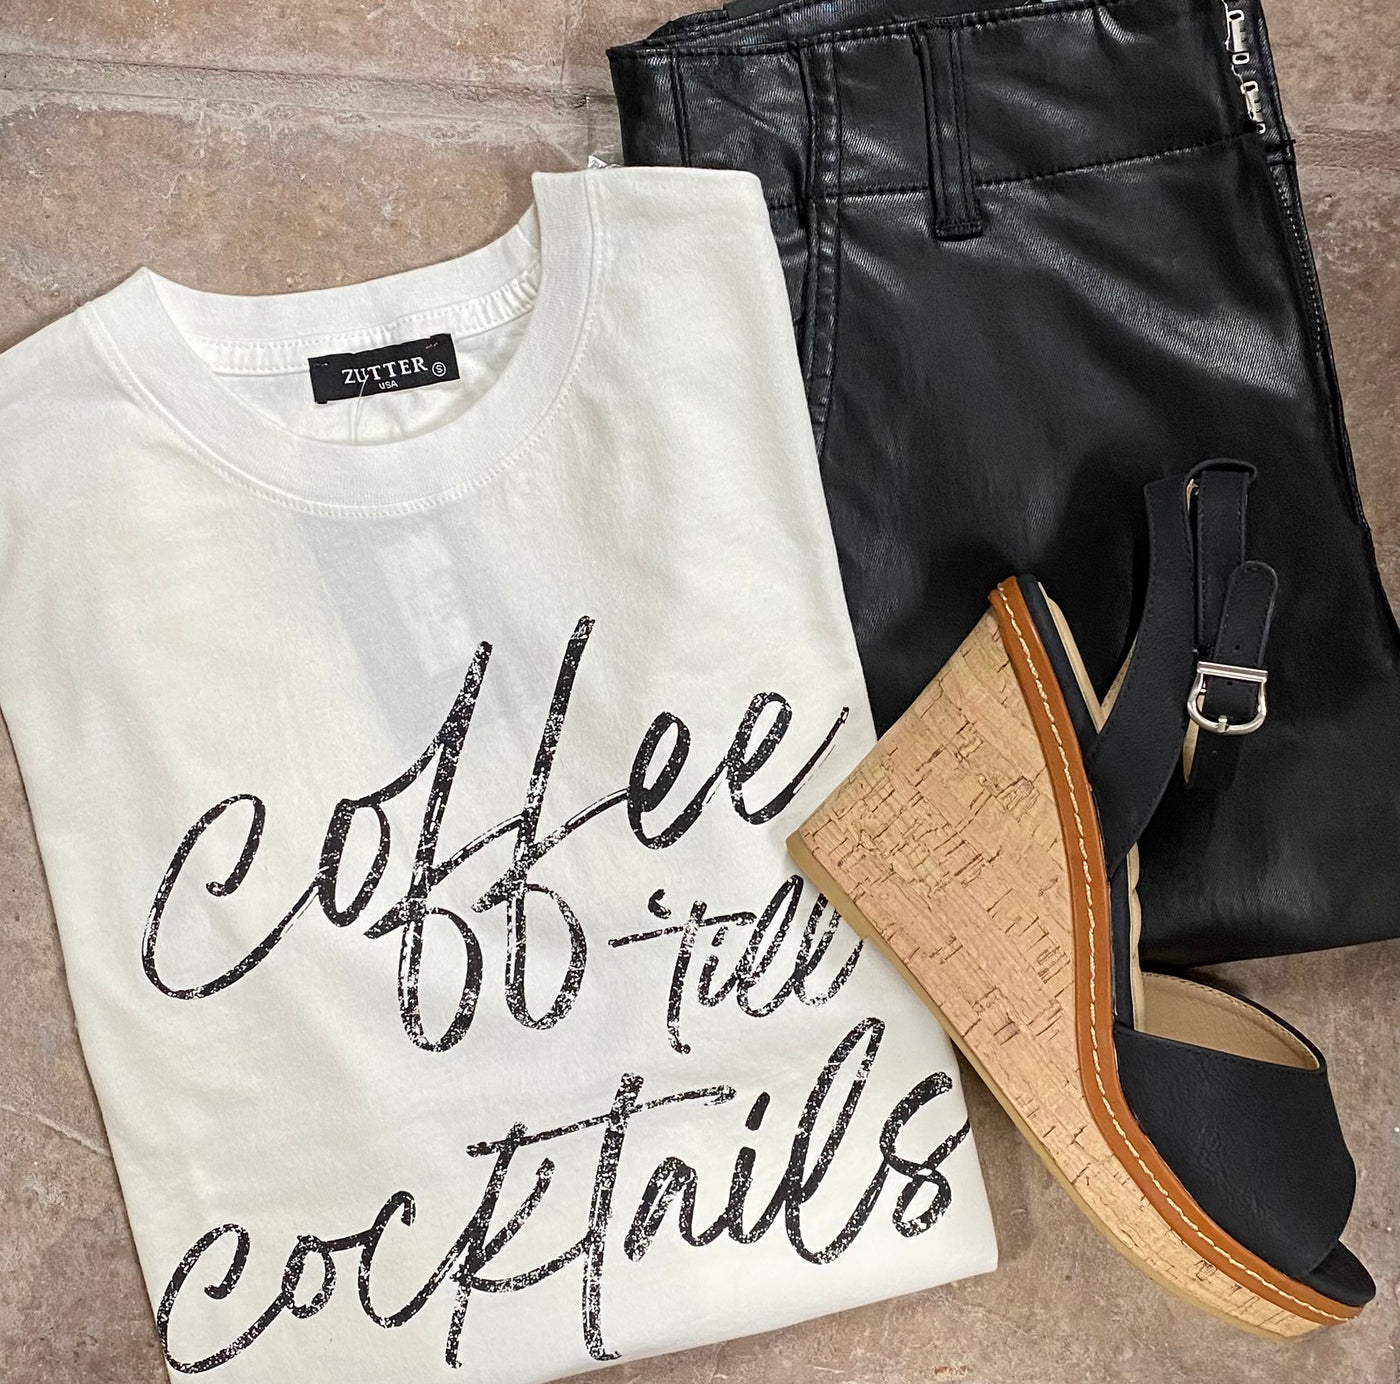 Coffee-Til-Cocktails Graphic Knit Top